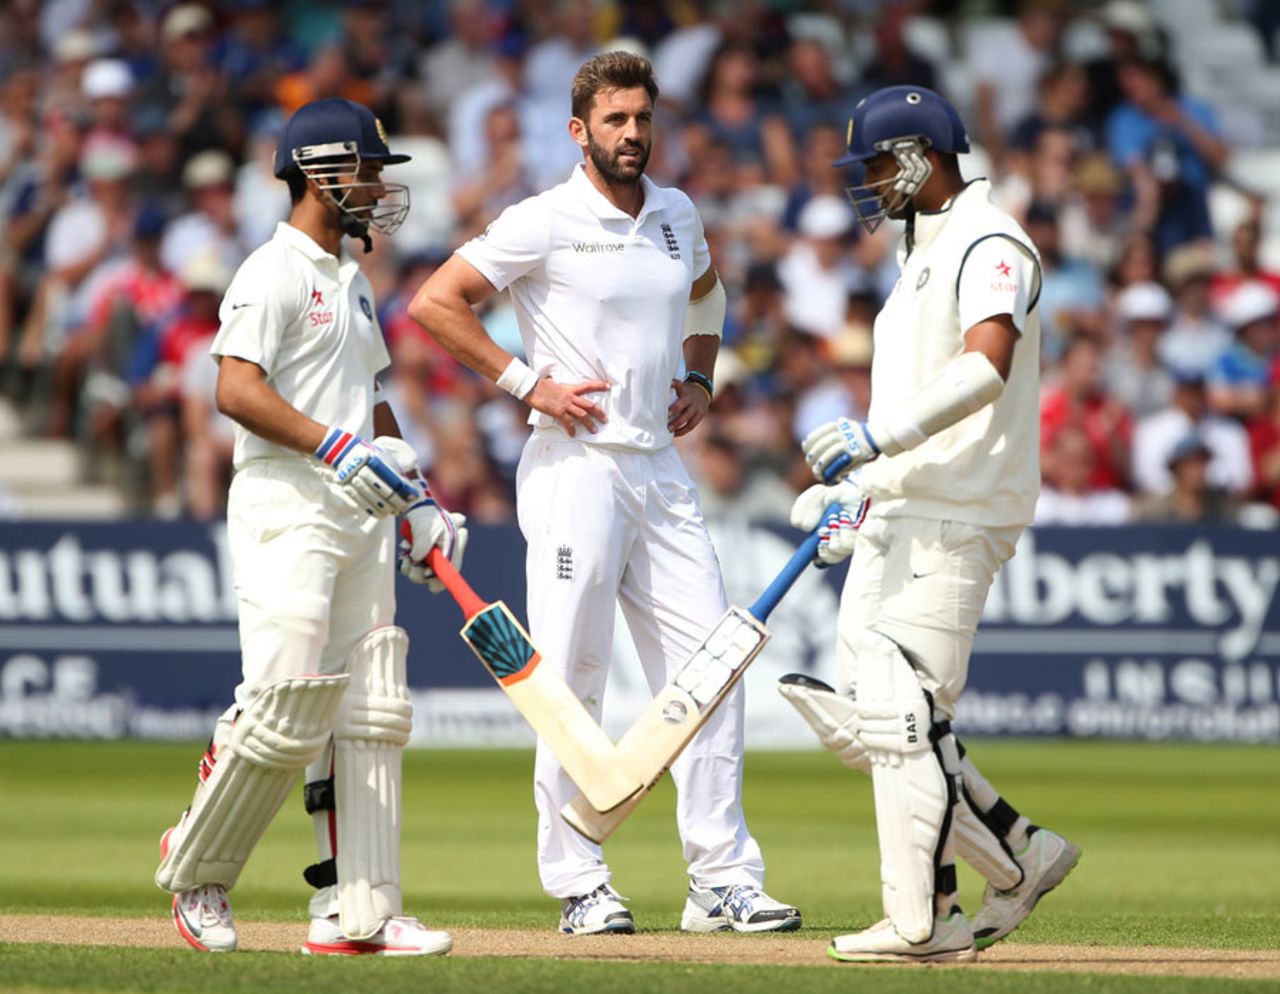 Ajinkya Rahane and M Vijay steadied India with their fourth-wicket stand, England v India, 1st Investec Test, Trent Bridge, 1st day, July 9, 2014